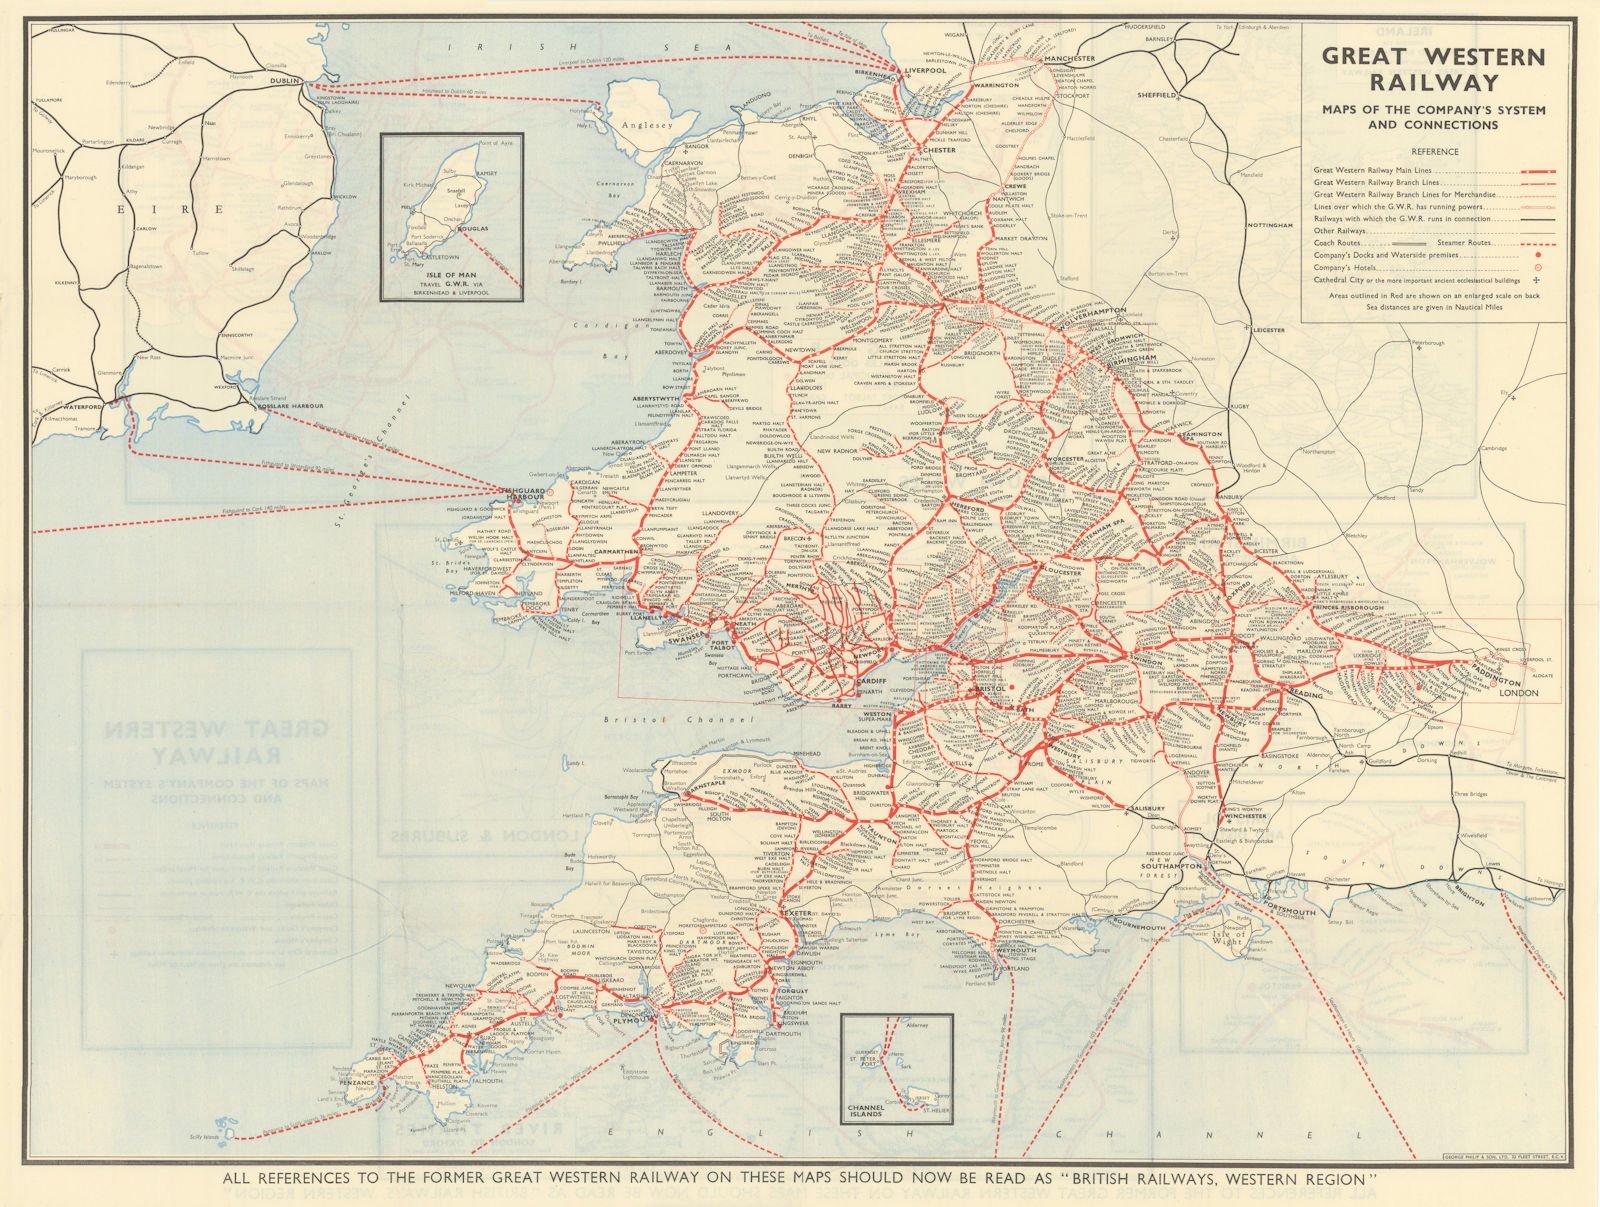 Great Western Railway - maps of the Company's system and connections c1948